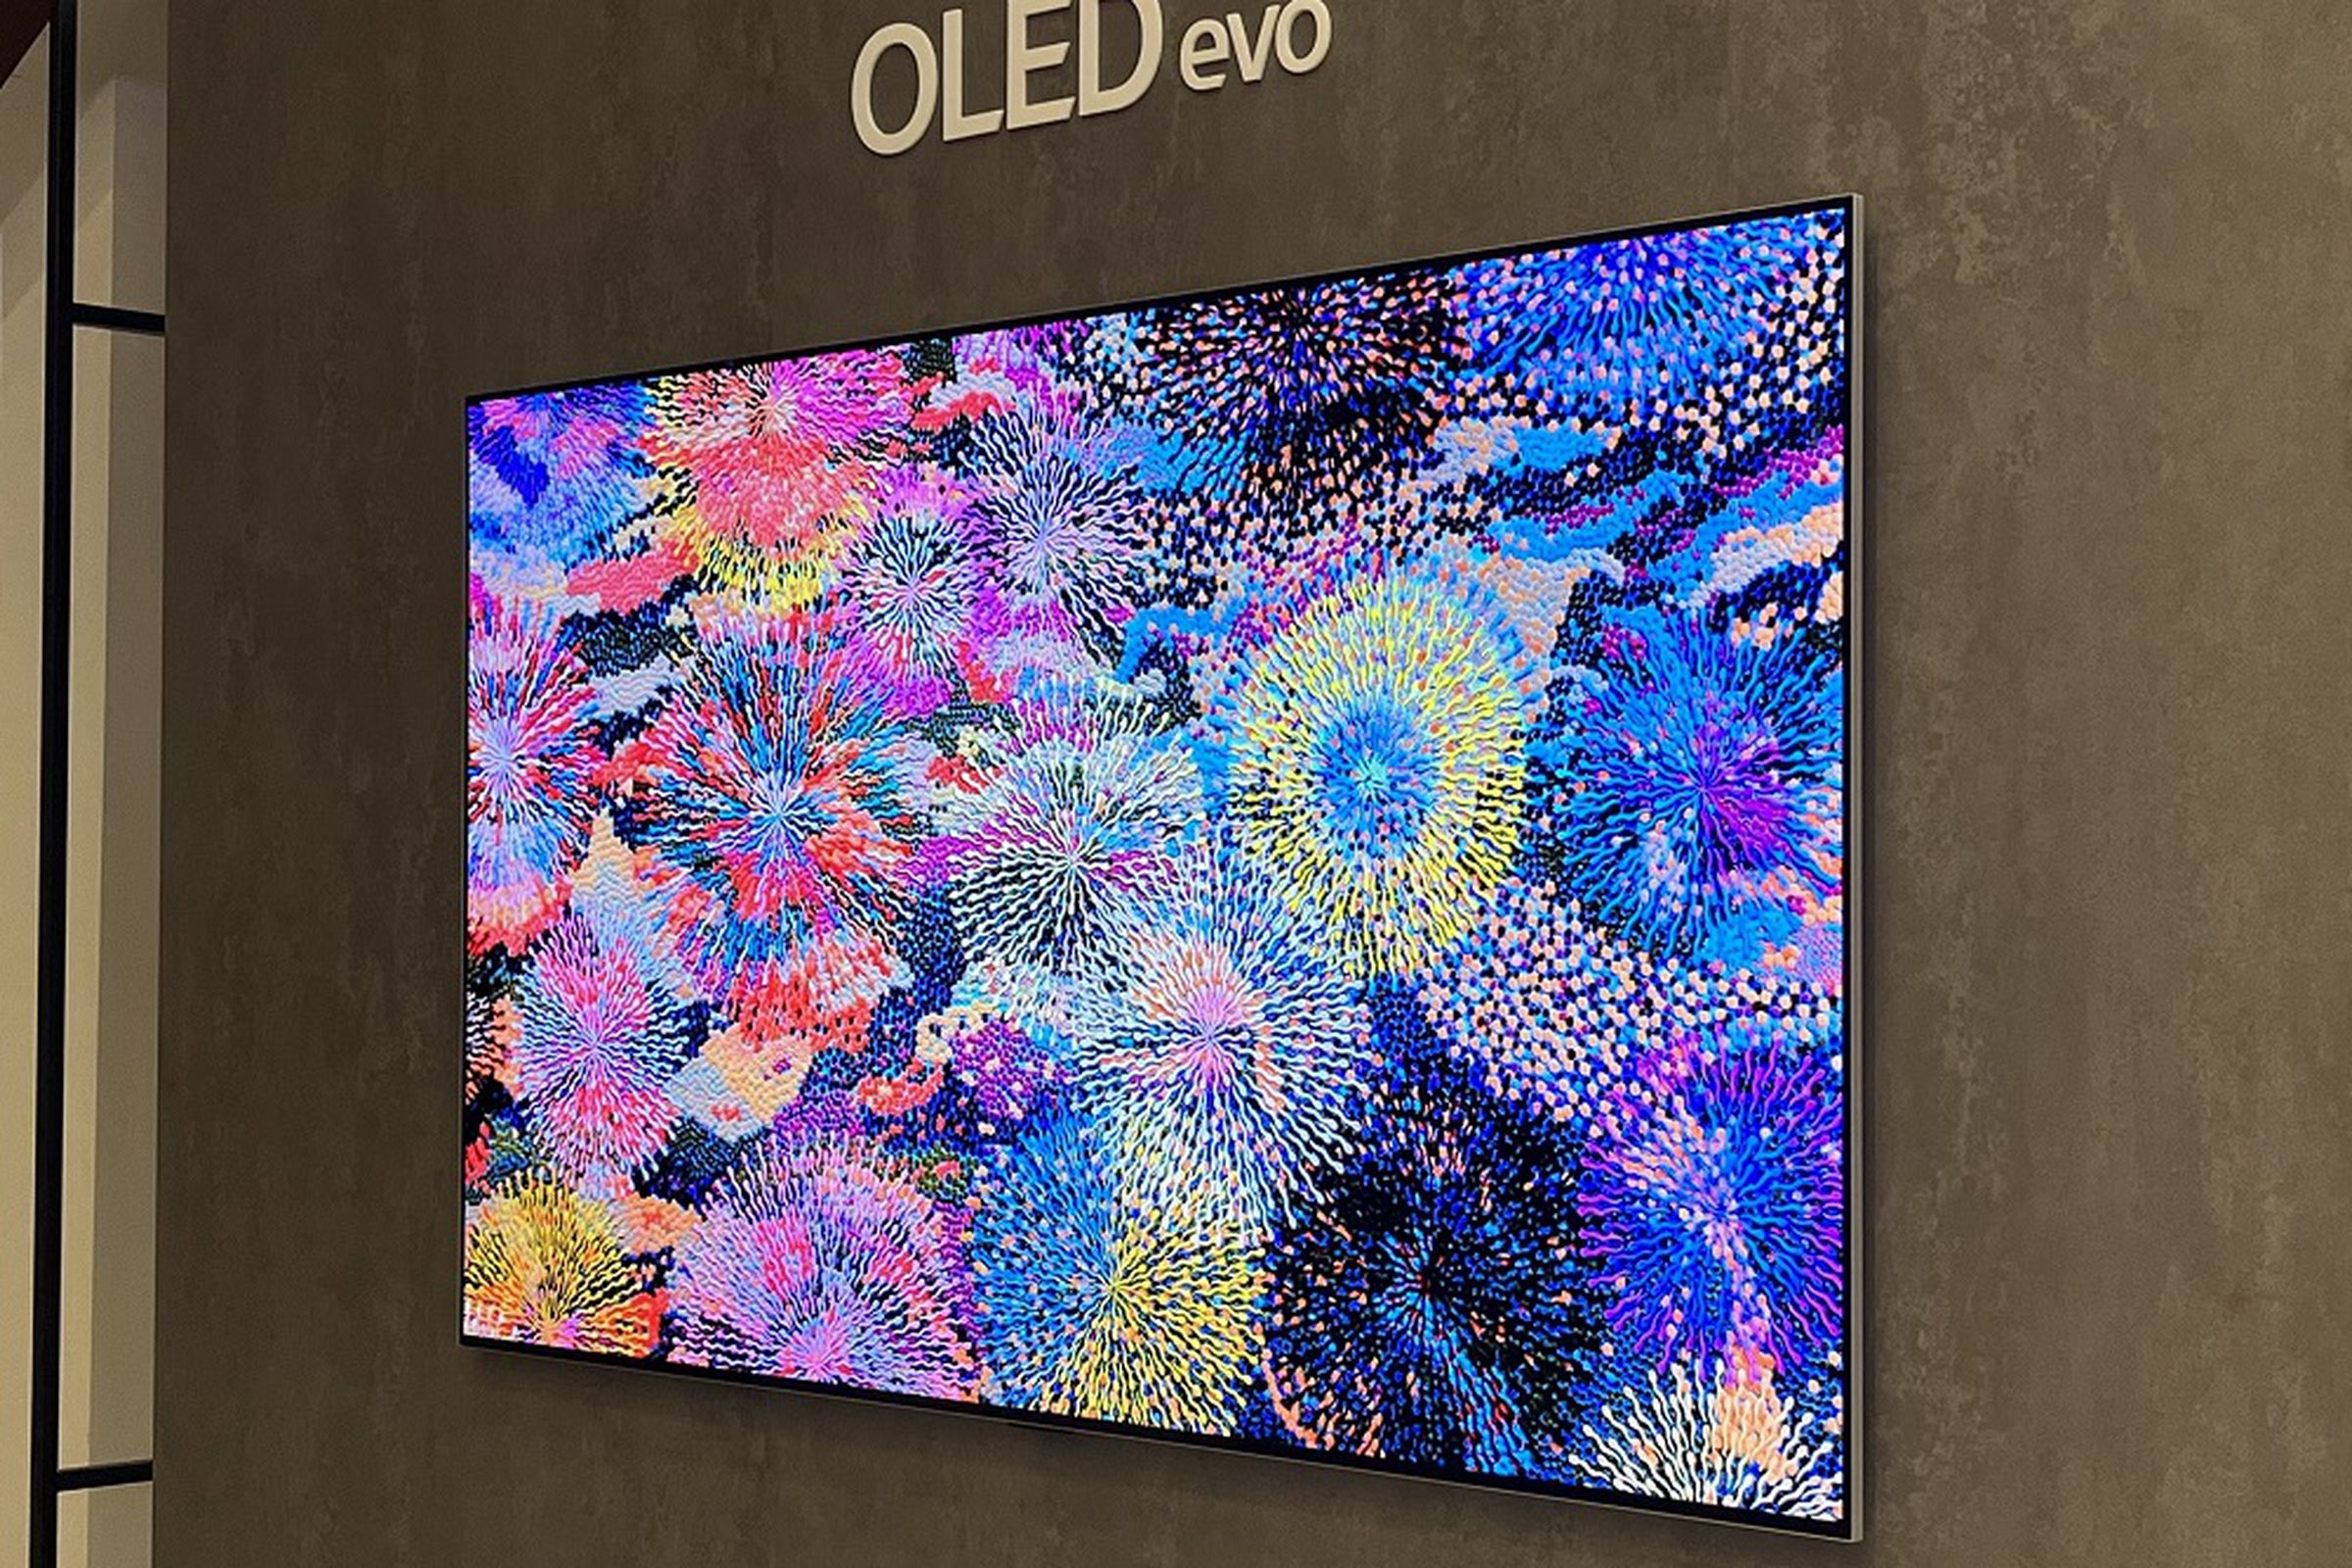 An image of the LG G3 OLED TV.